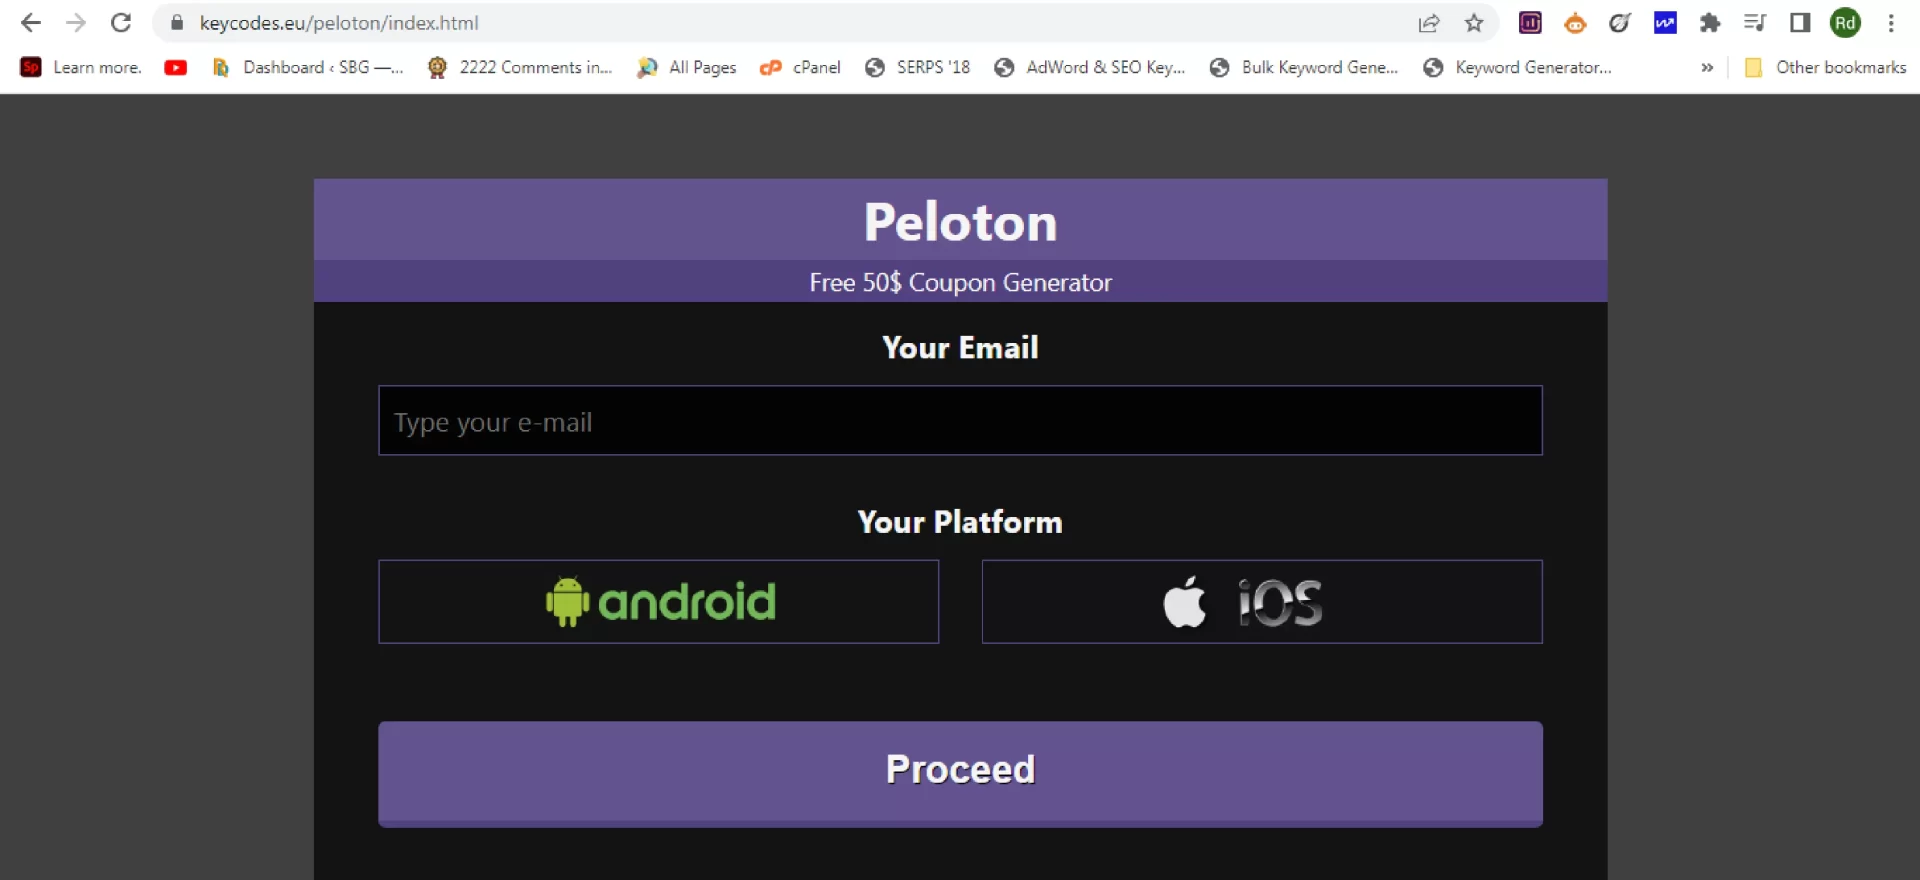 How To Find Peloton Referral Code